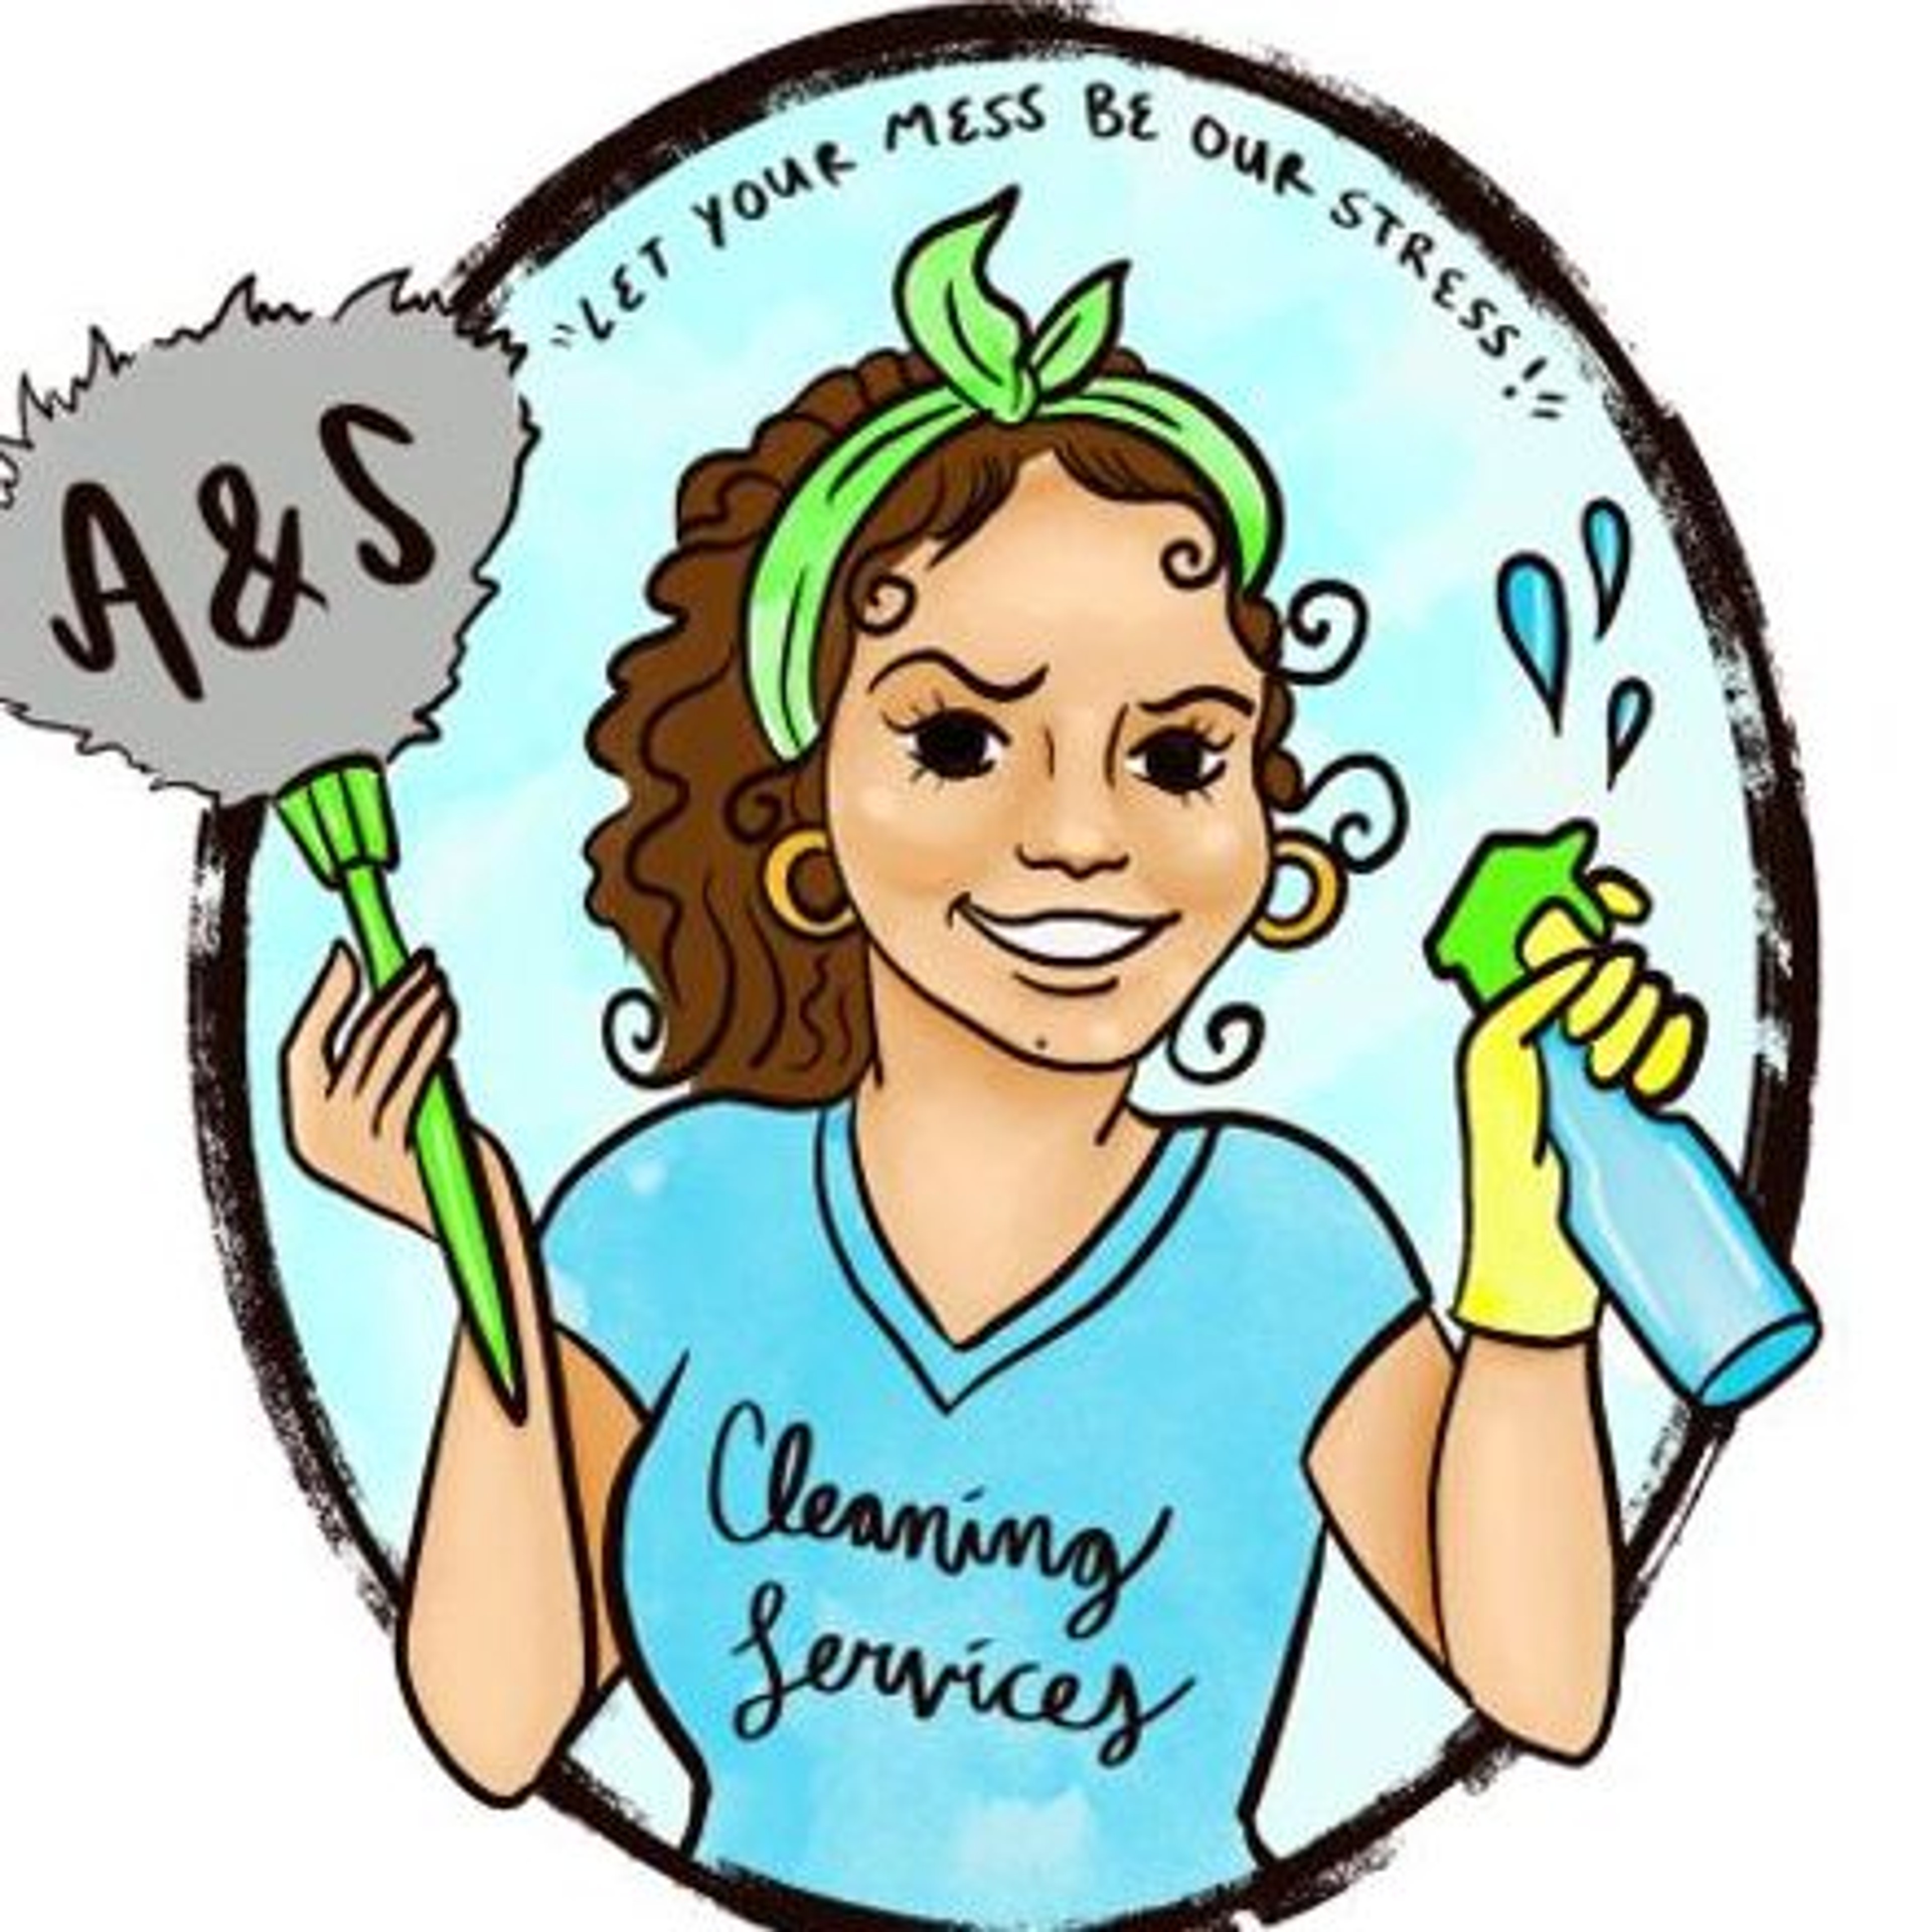 Co-owner of A&S Cleaning Services LLC, 5 years of excellent cleaning experience. We provide our own supplies, trained staff